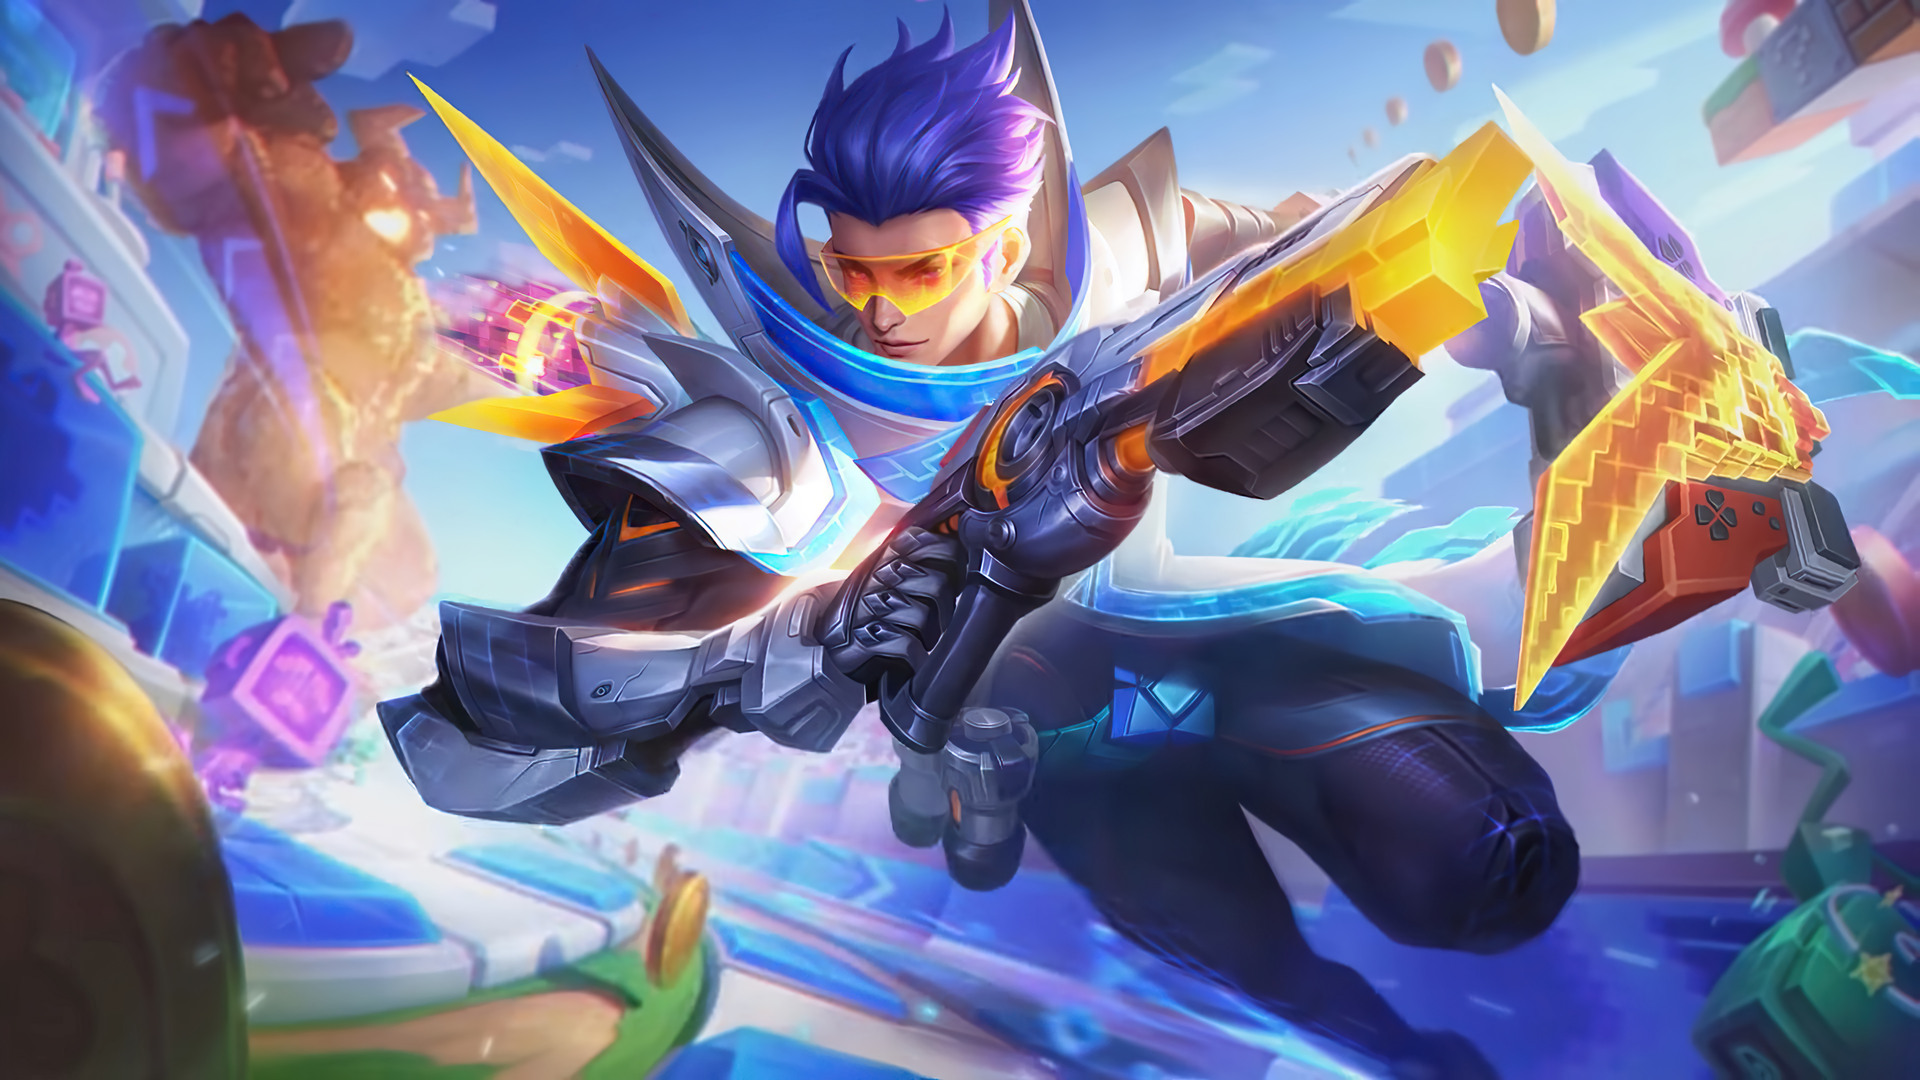 Mobile Legends New Skin Granger Agent Z Review. PinoyGamer Gaming News and. Mobile legend wallpaper, Hero wallpaper, Alucard mobile legends